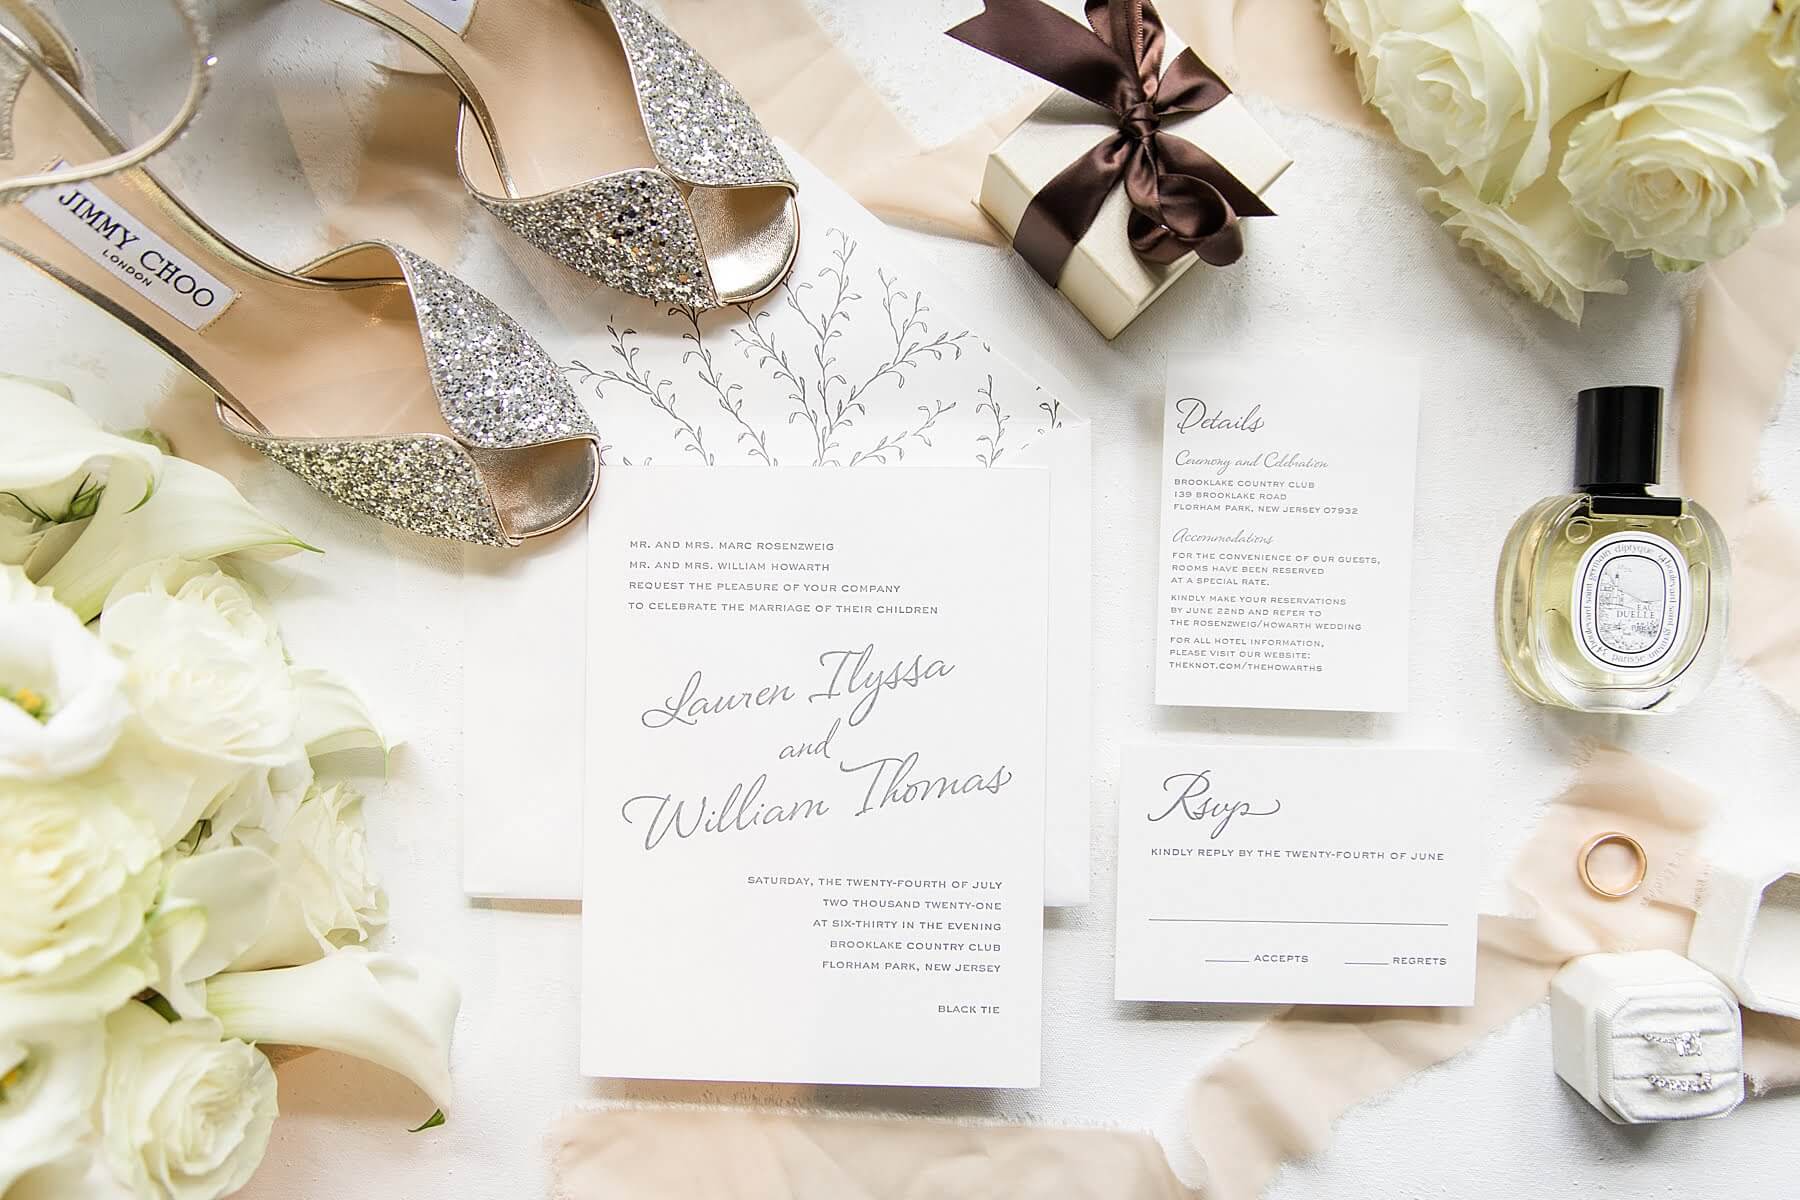 A variety of wedding items, including a wedding invitation and wedding shoes, are artfully arranged on a table at one of the exquisite Florham Park wedding venues in New Jersey.